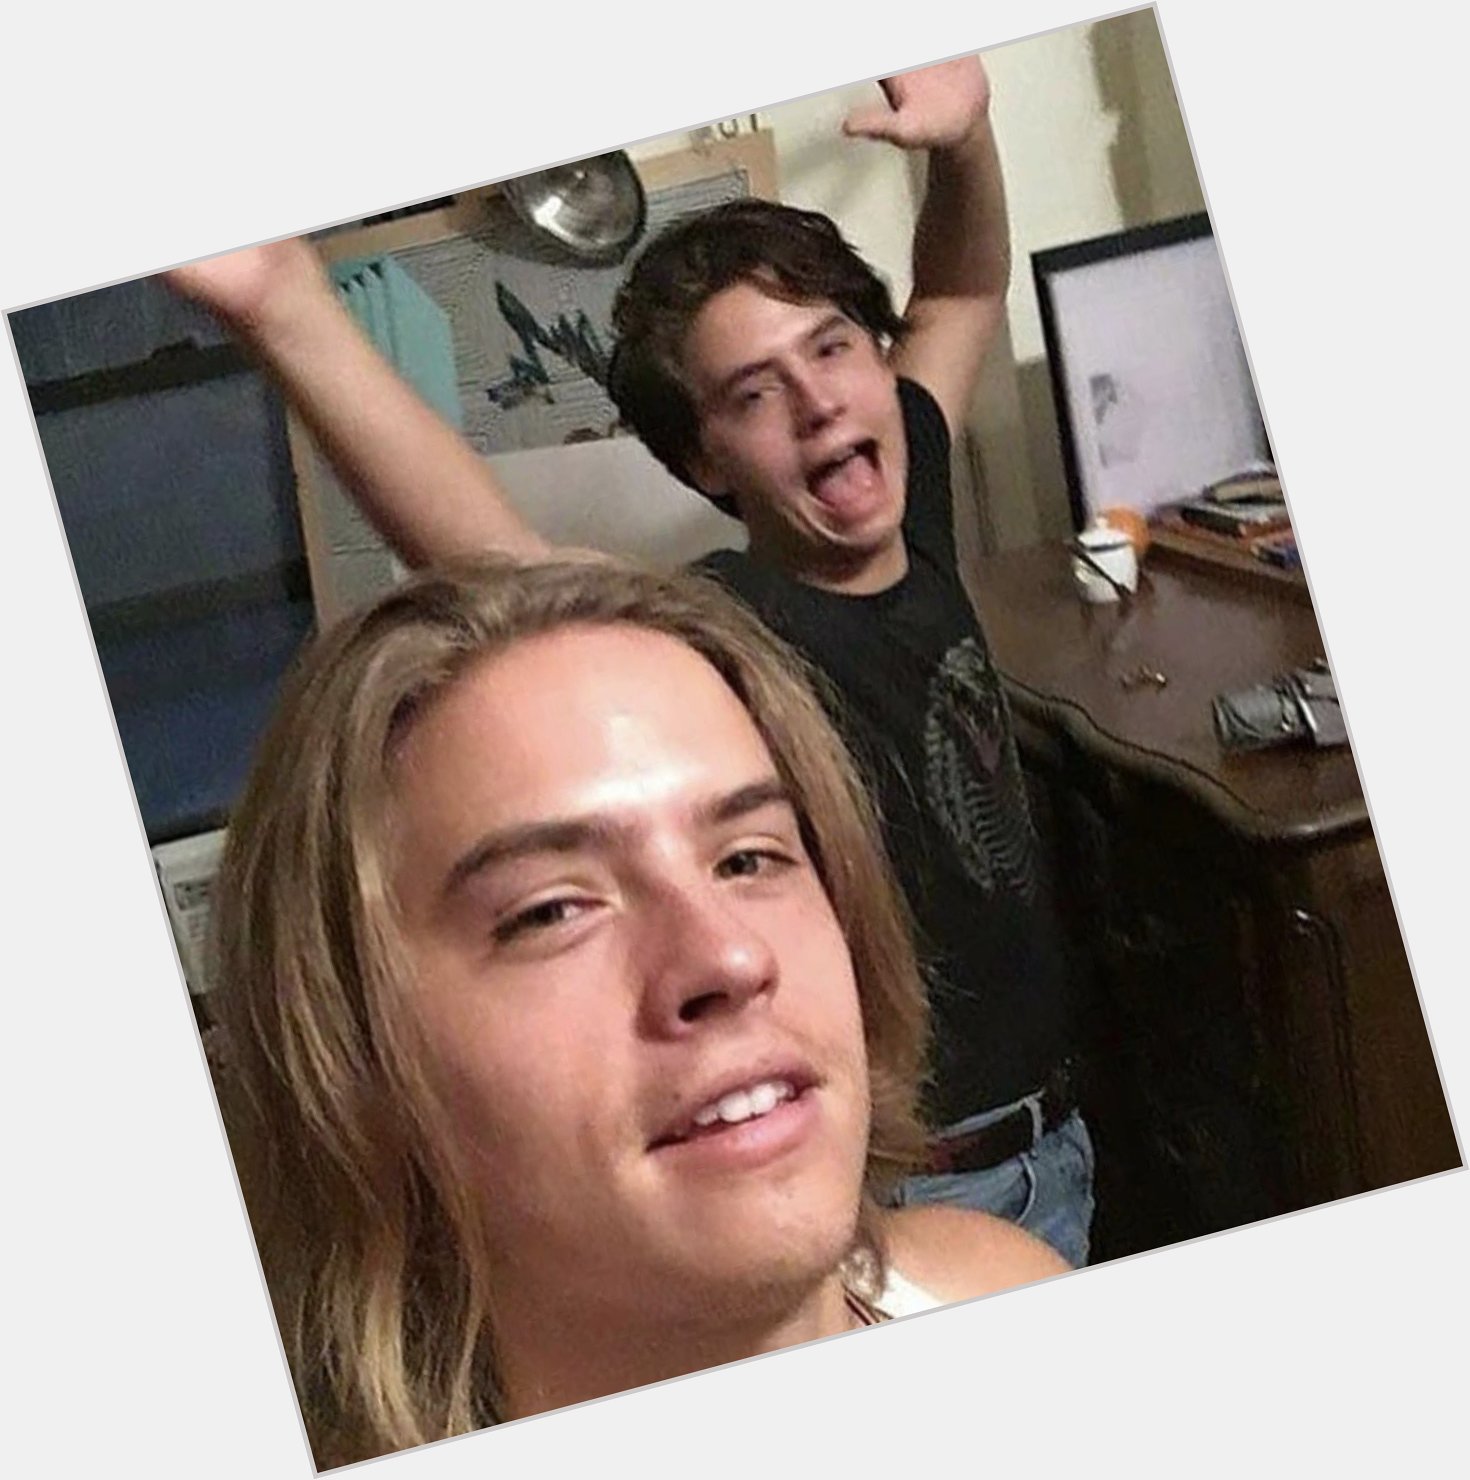 HaPpY bIrThDaY tO COLE SPROUSE aNd DYLAN SPROUSE    